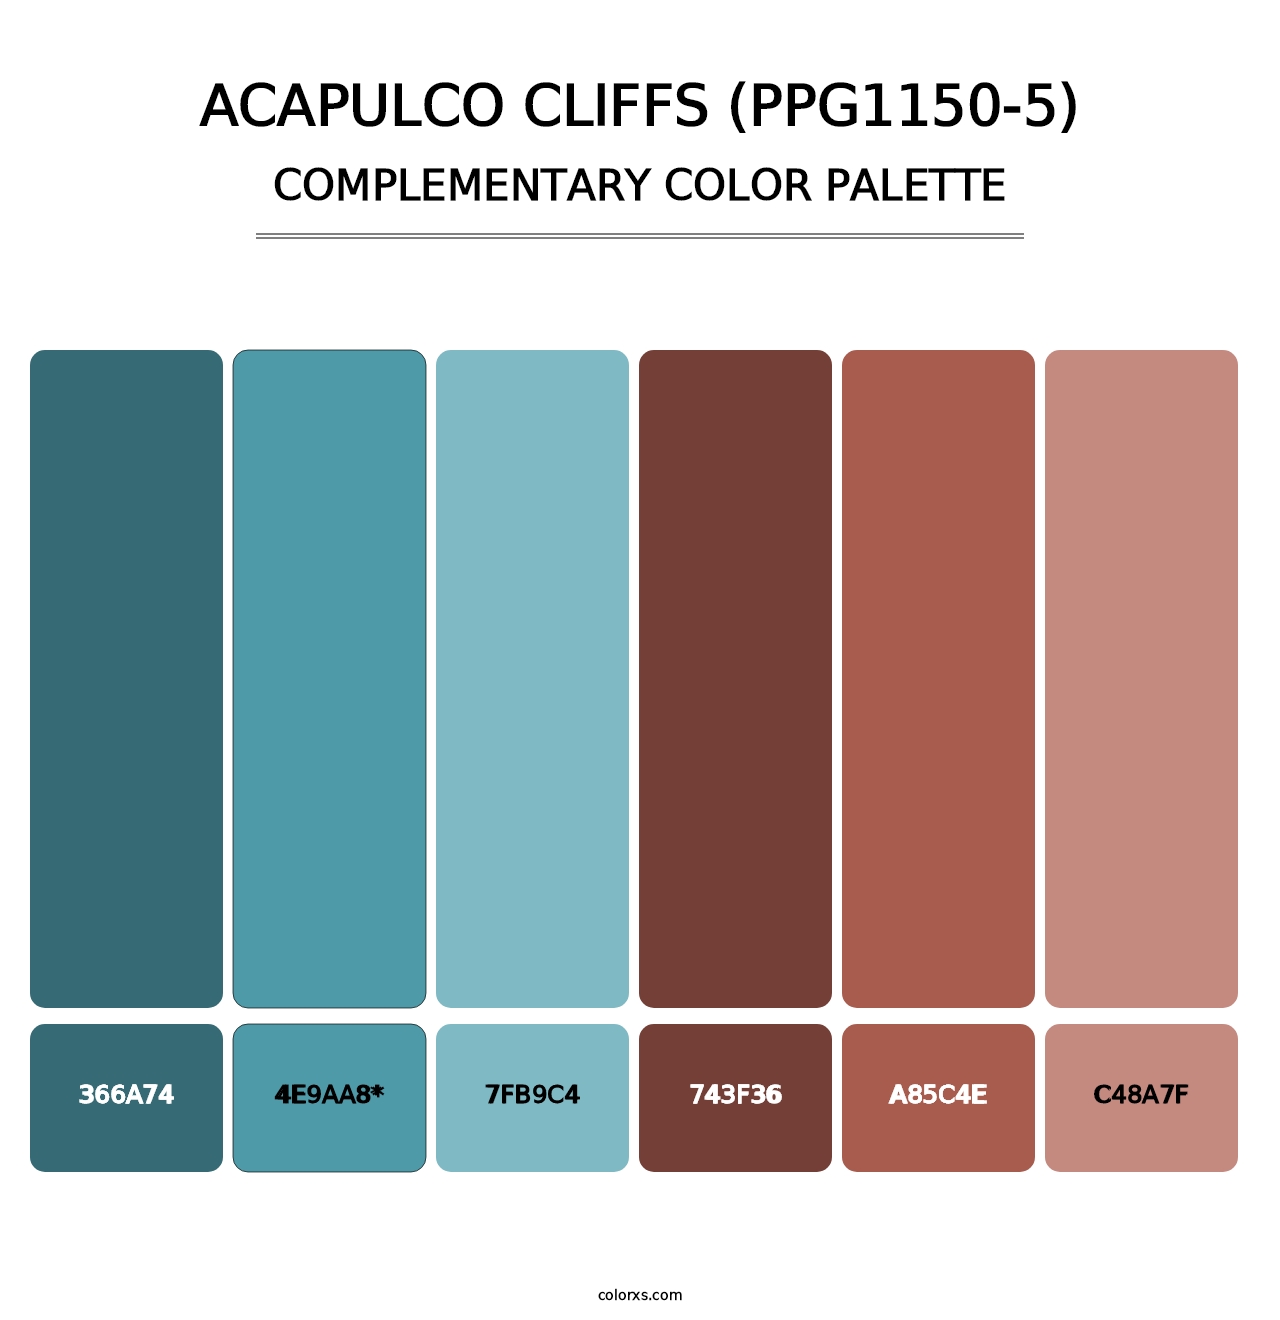 Acapulco Cliffs (PPG1150-5) - Complementary Color Palette